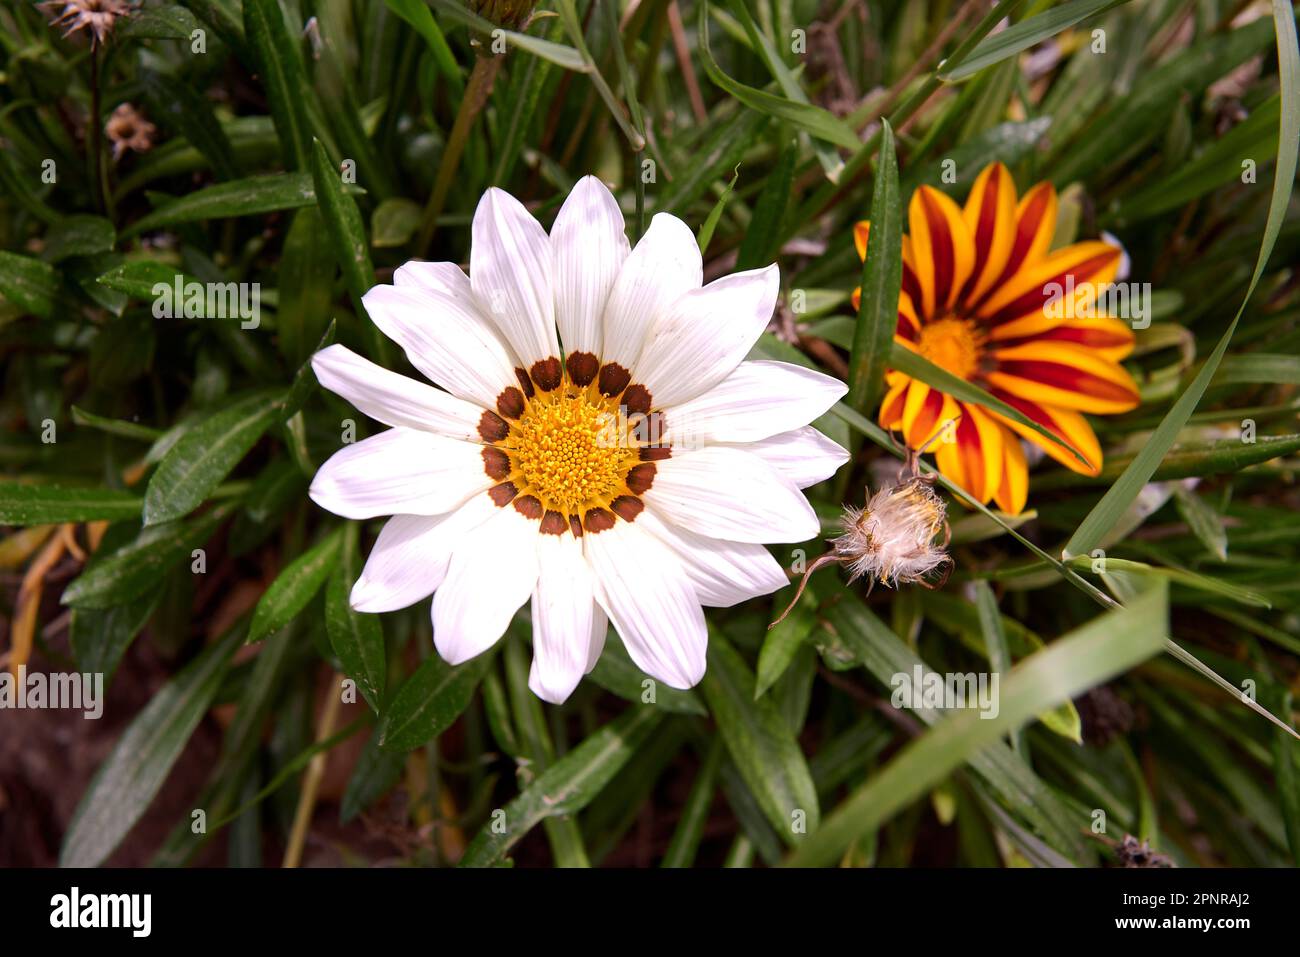 Group of two Indian flowers, orange and white. White and yellow Indian flower, unfocussed base. Macro photography, detail of the parts of the flower. Stock Photo